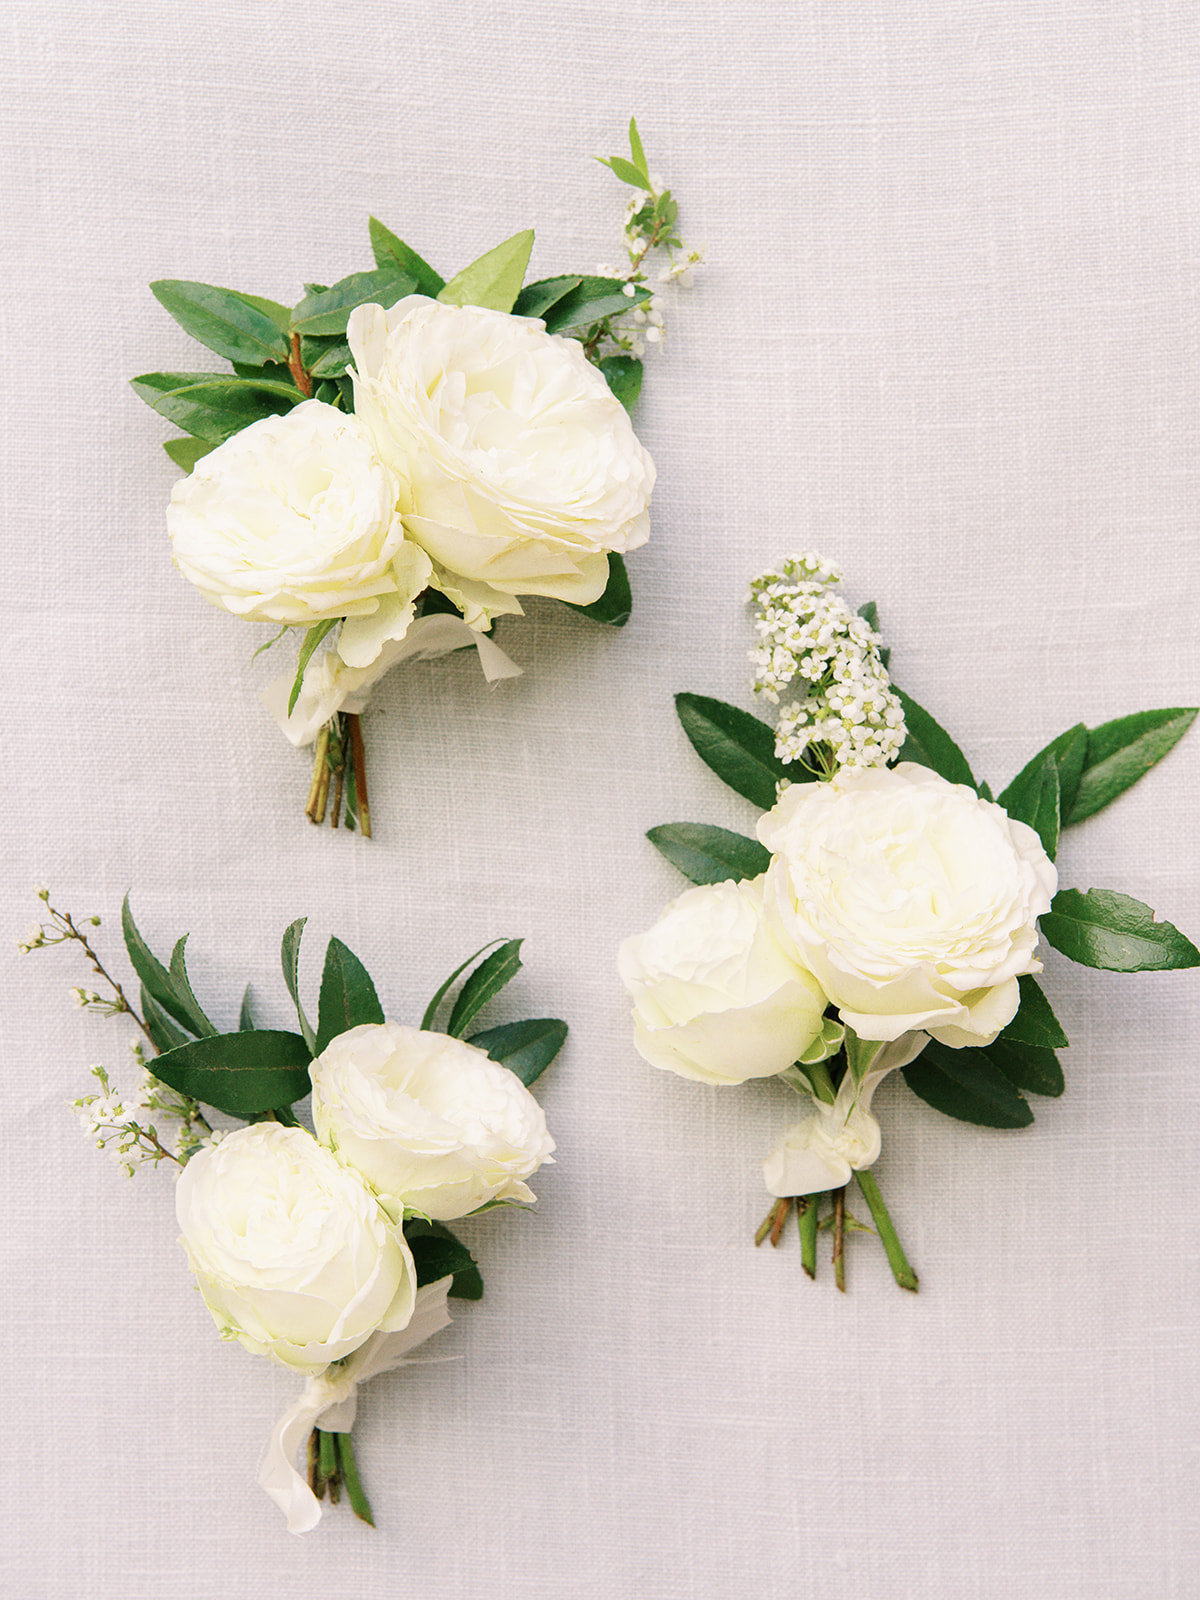 Dainty white classic boutonnieres with white garden spray roses and spirea. Garden inspired Nashville, TN church wedding. Design by Rosemary and Finch Floral Design in Nashville, TN